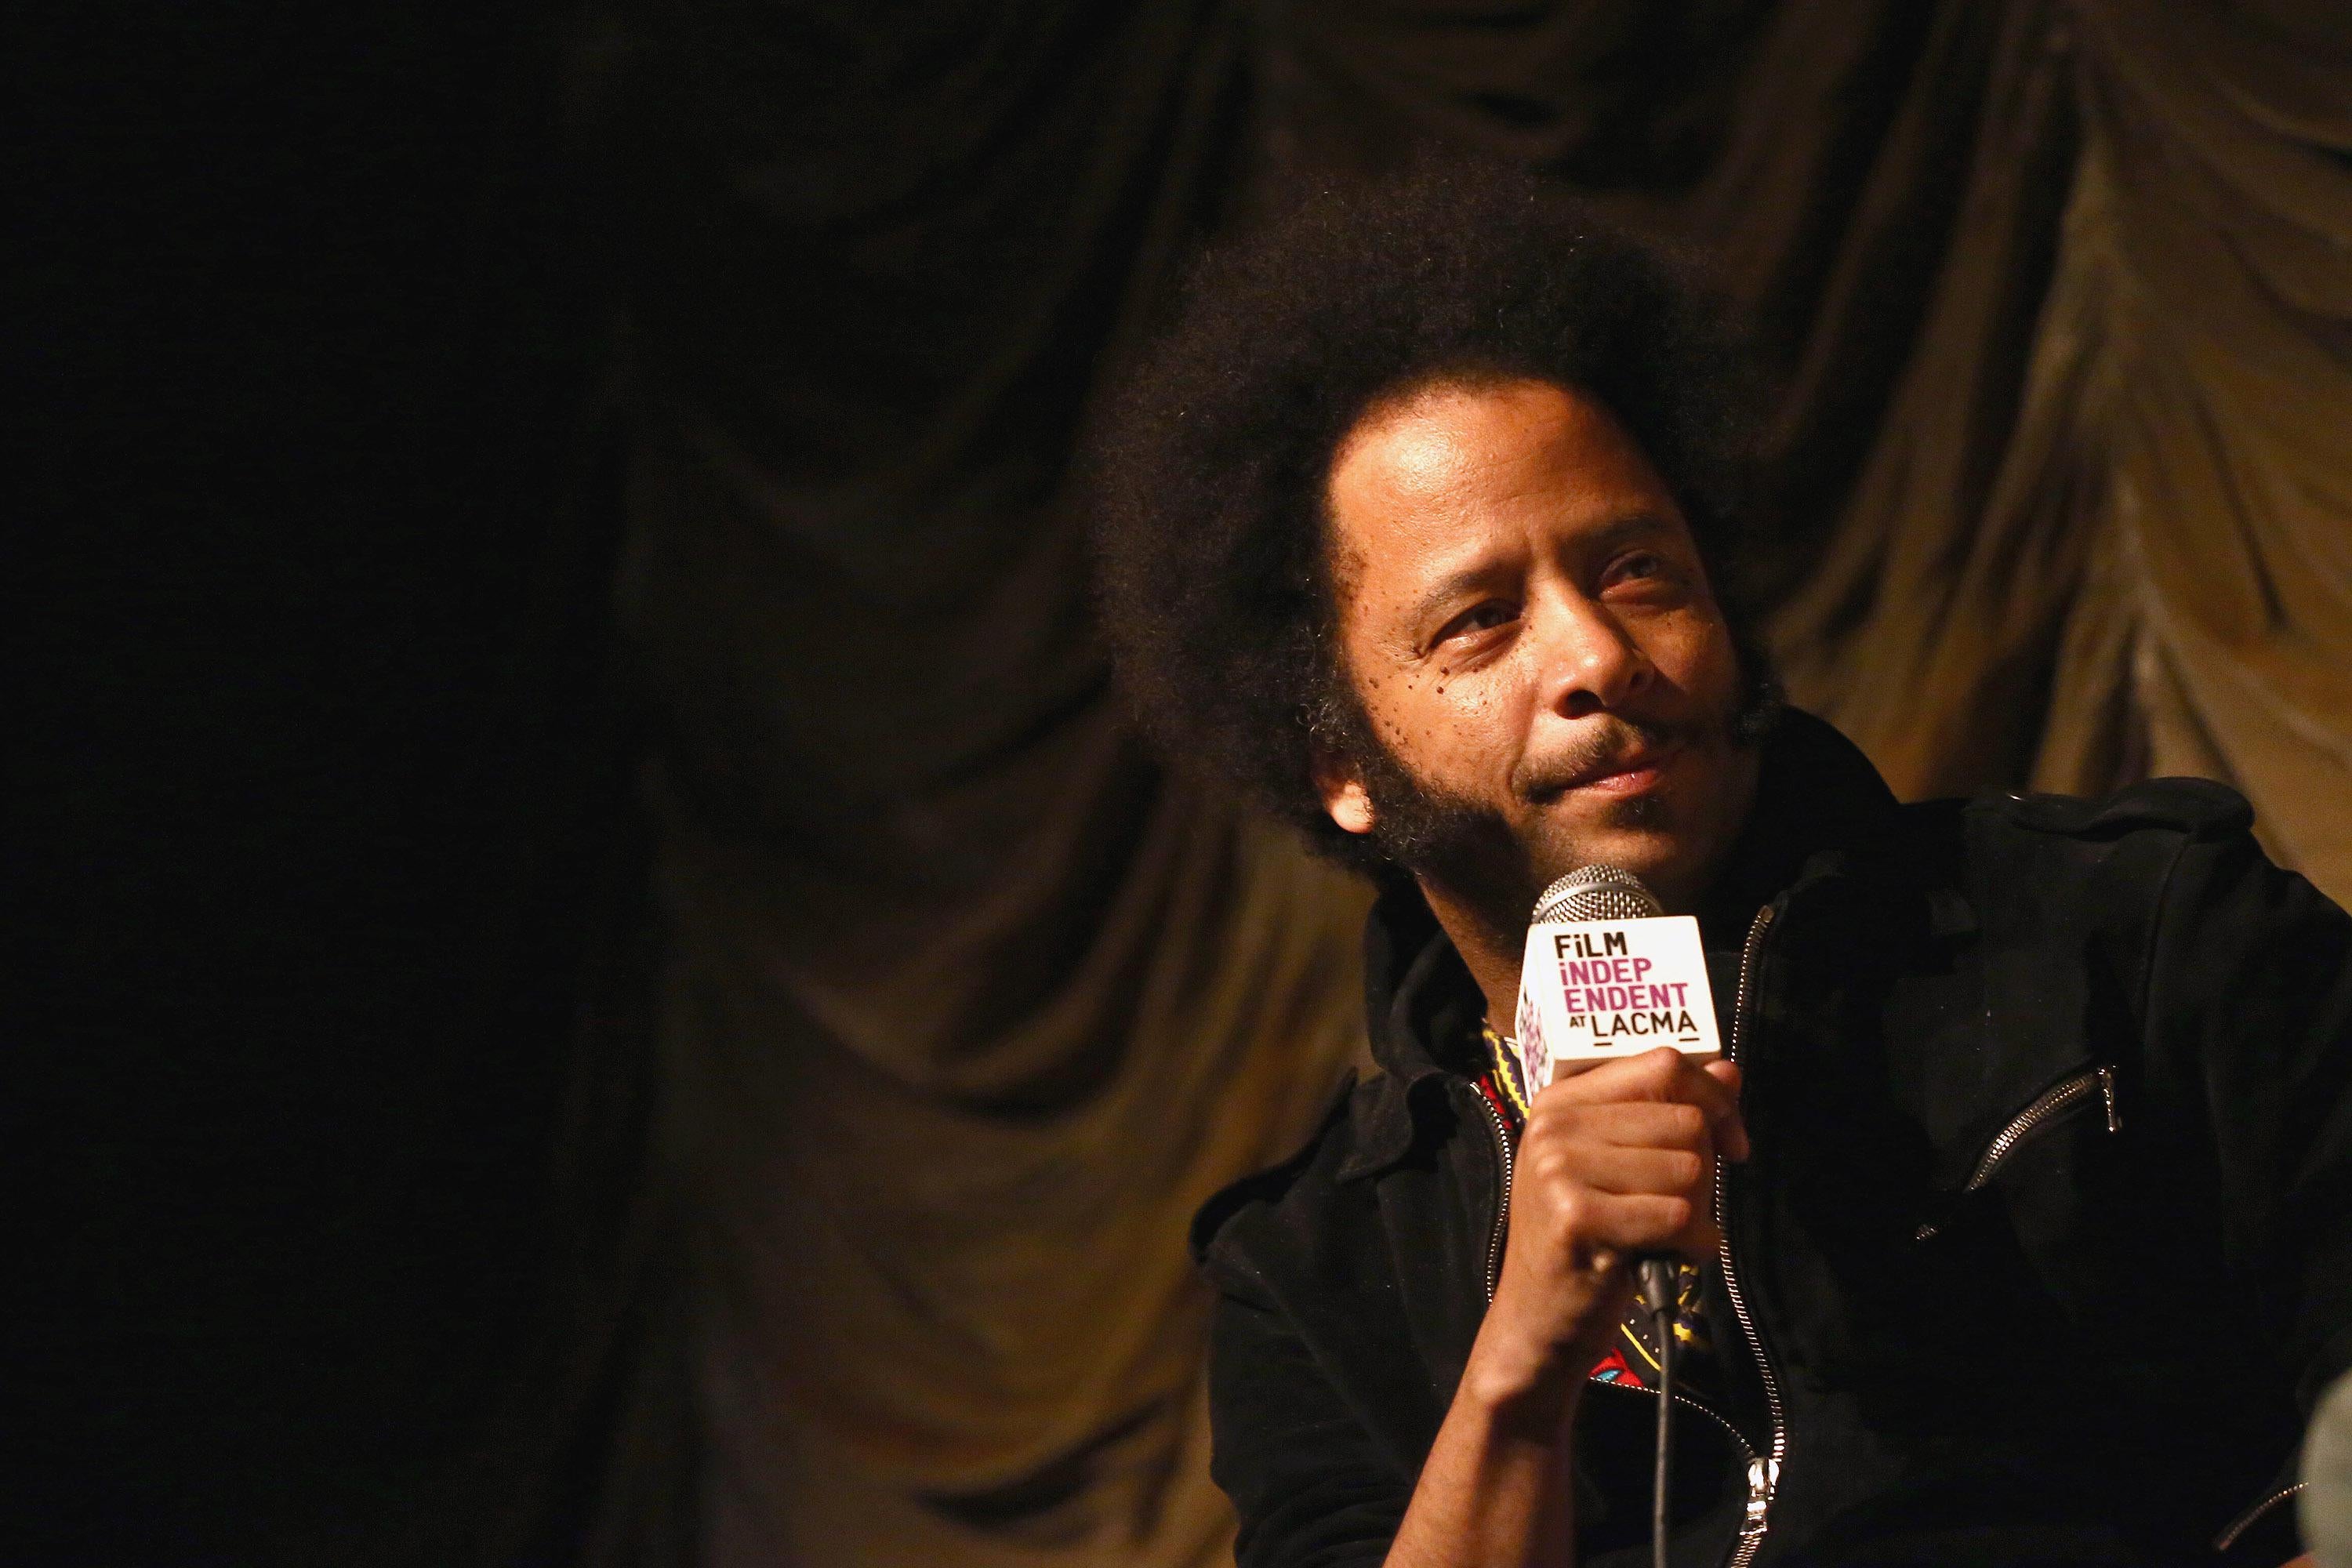 Boots Riley, looking skeptical.